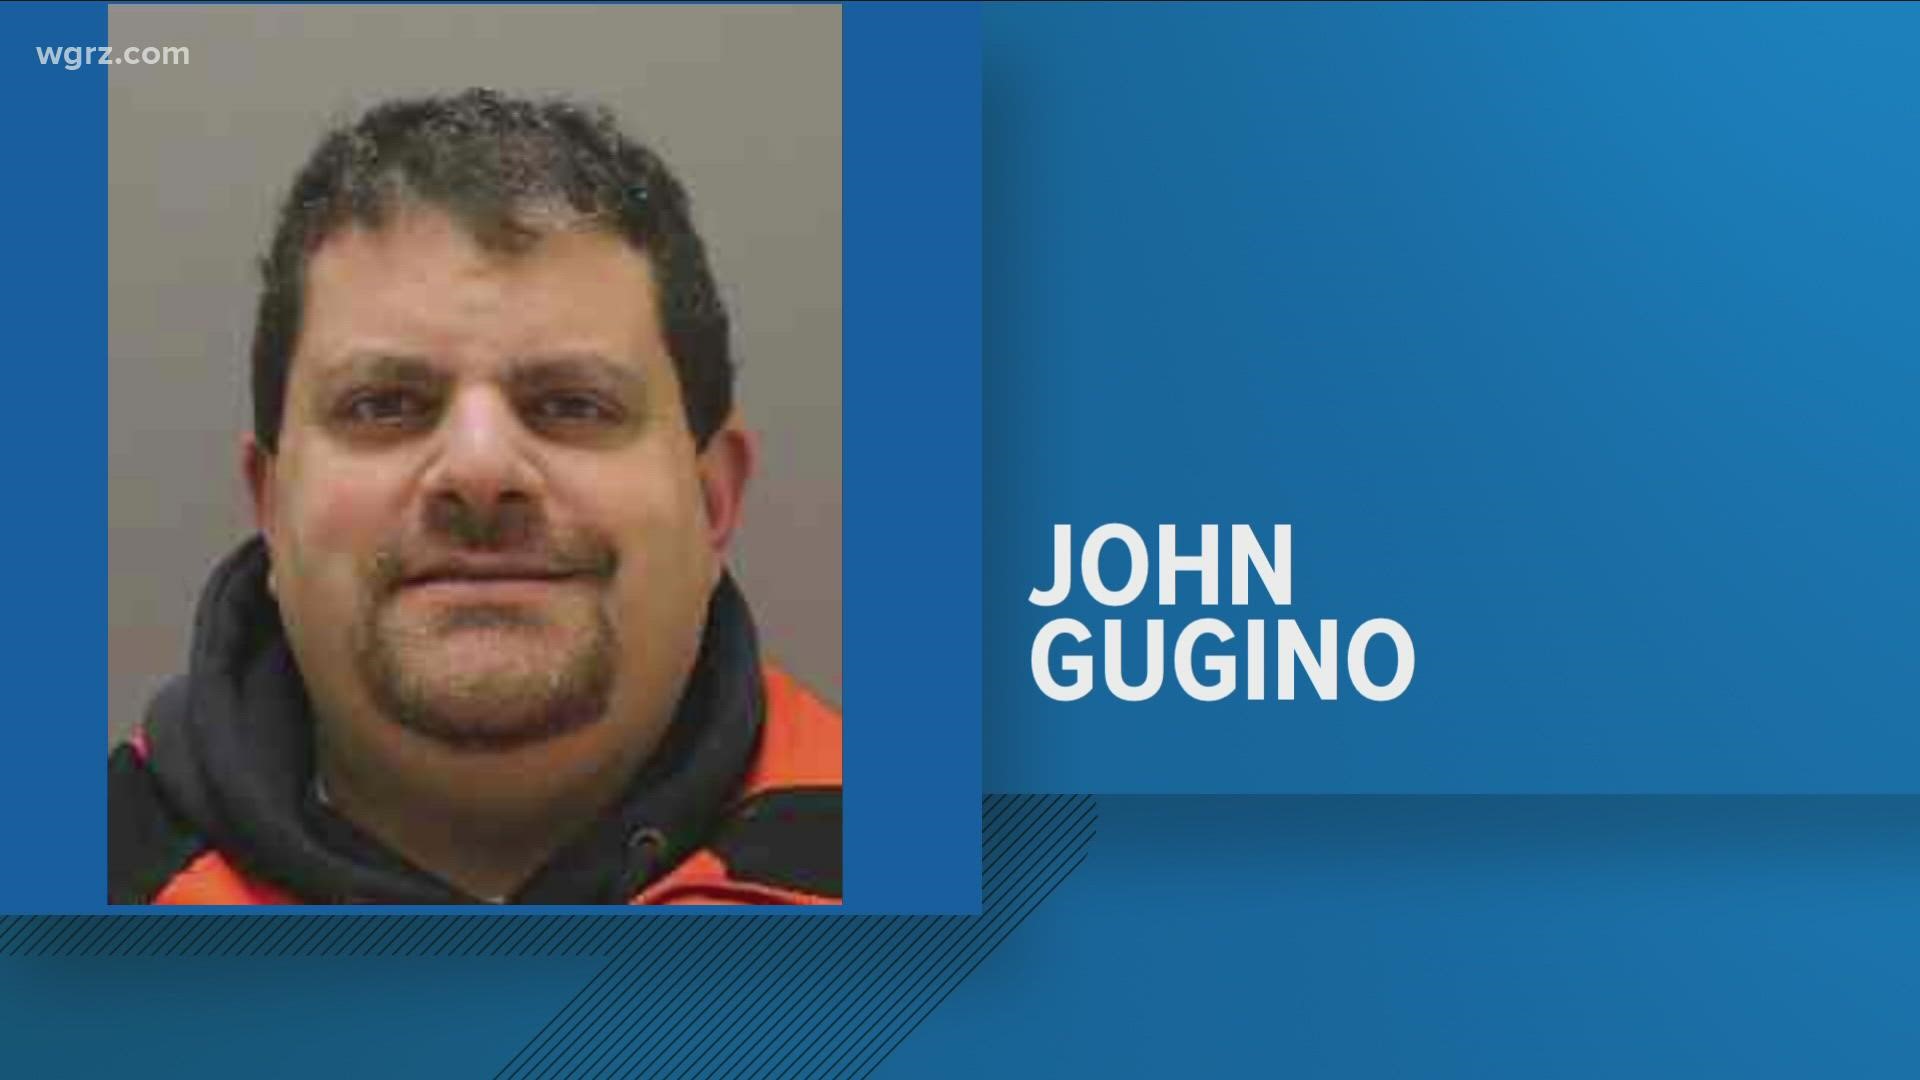 The sheriff's office says 45-year-old John Gugino of Hamburg is charged with criminal trespass and harassment.